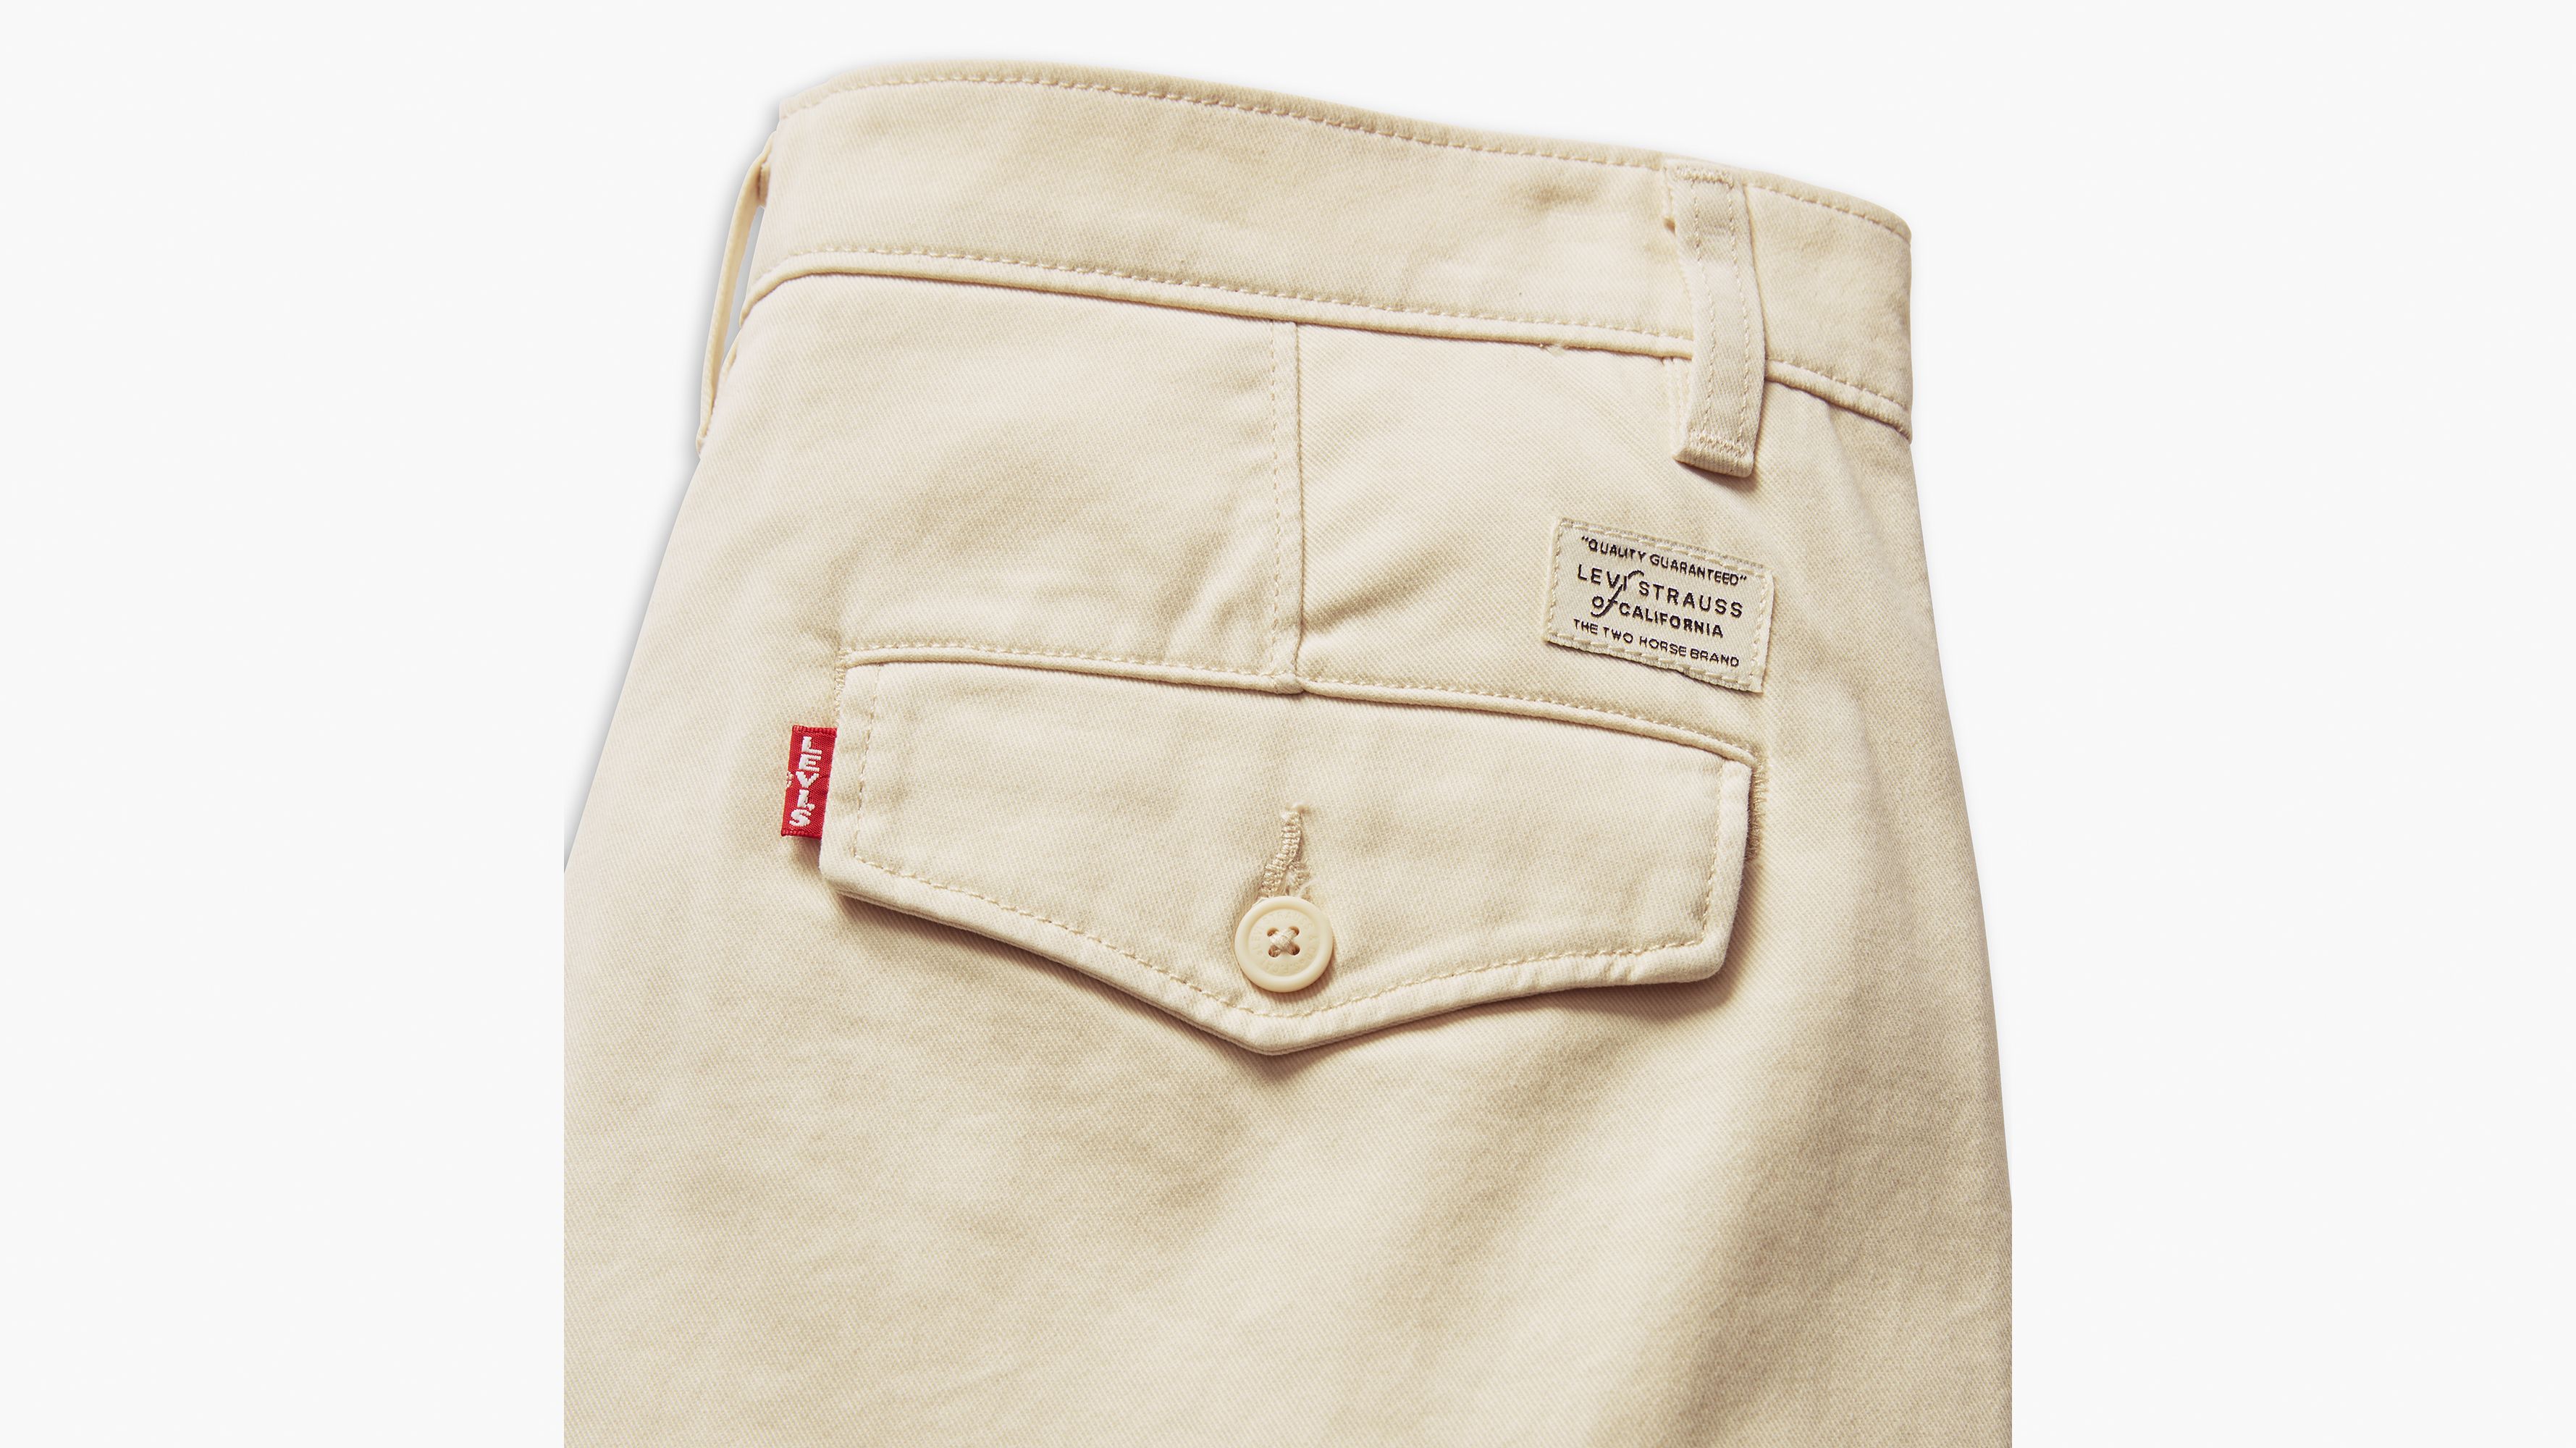 Levi's® XX Chino Authentic Straight Pants - Levi's Jeans, Jackets & Clothing